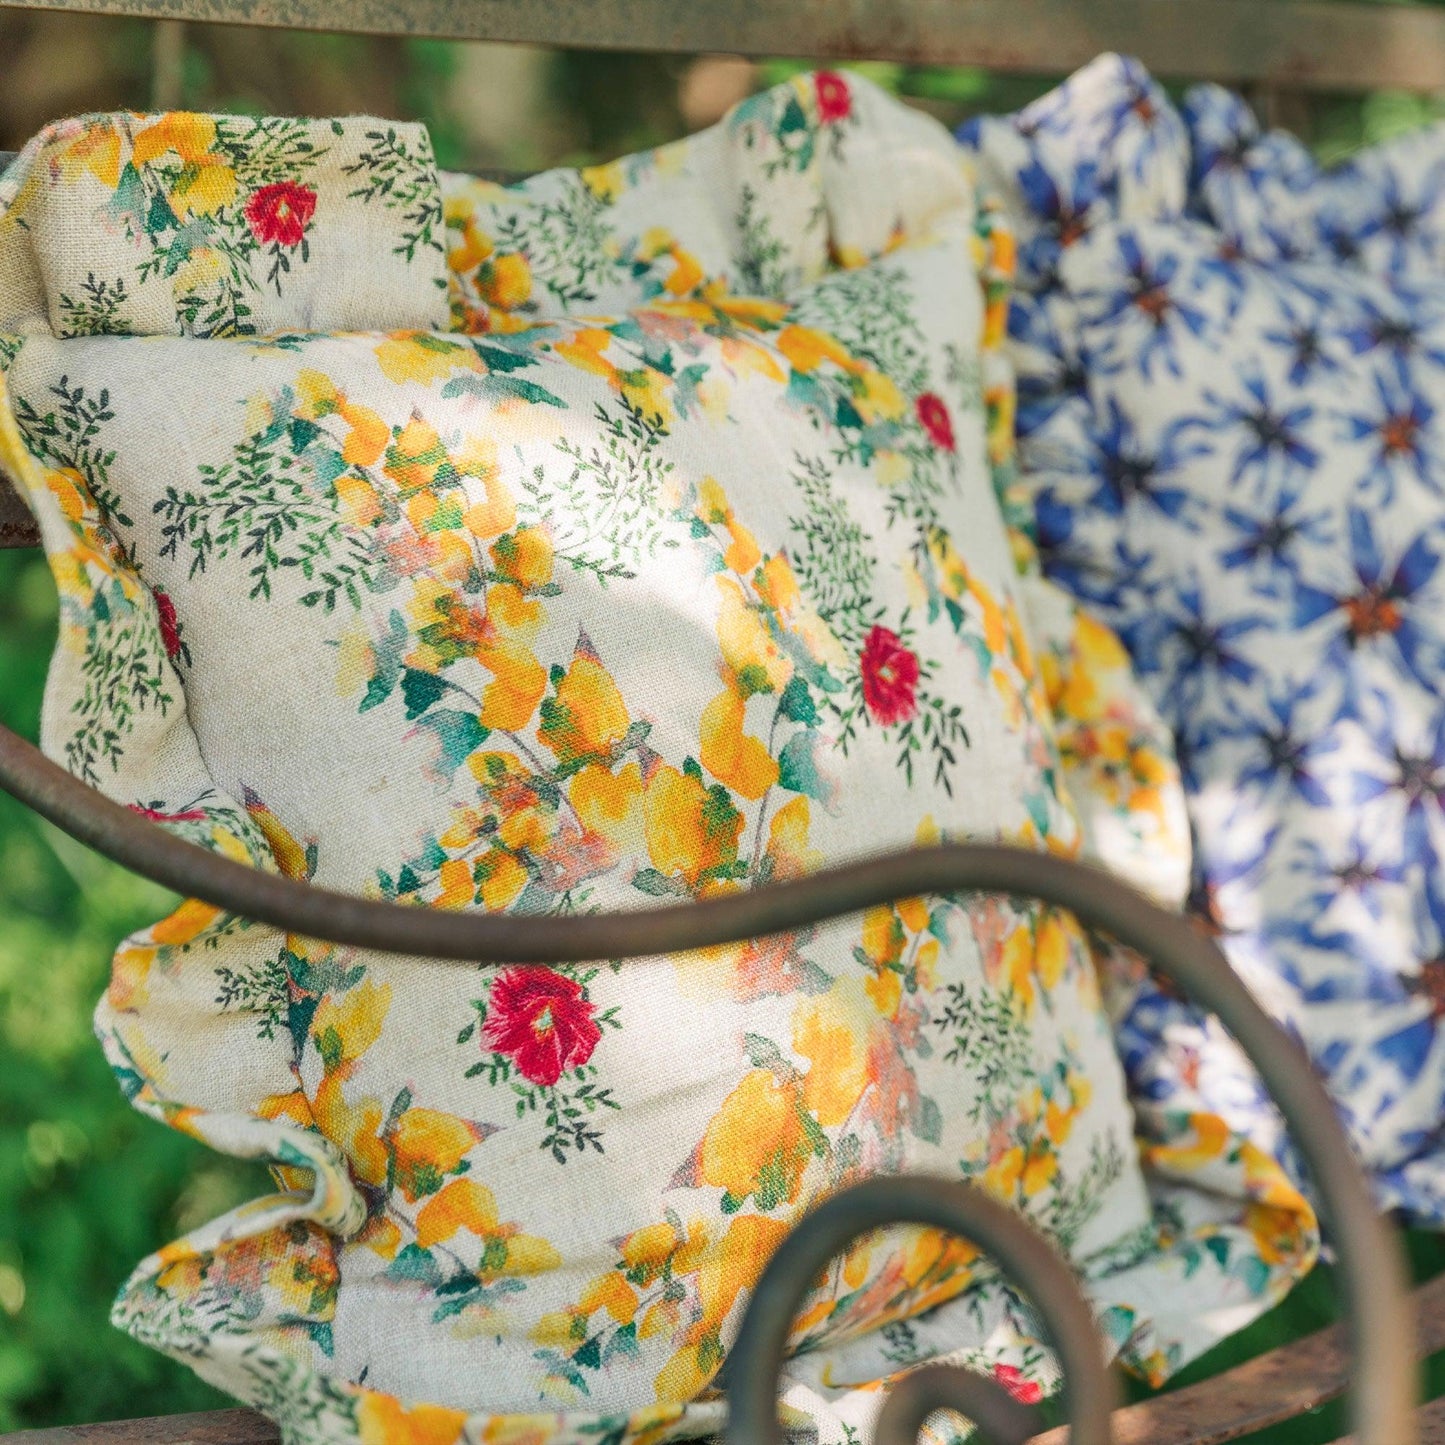 A square pillow with ruffles made of organic linen and printed with bright florals sits on an outdoor bench, the sun playing on its surface.